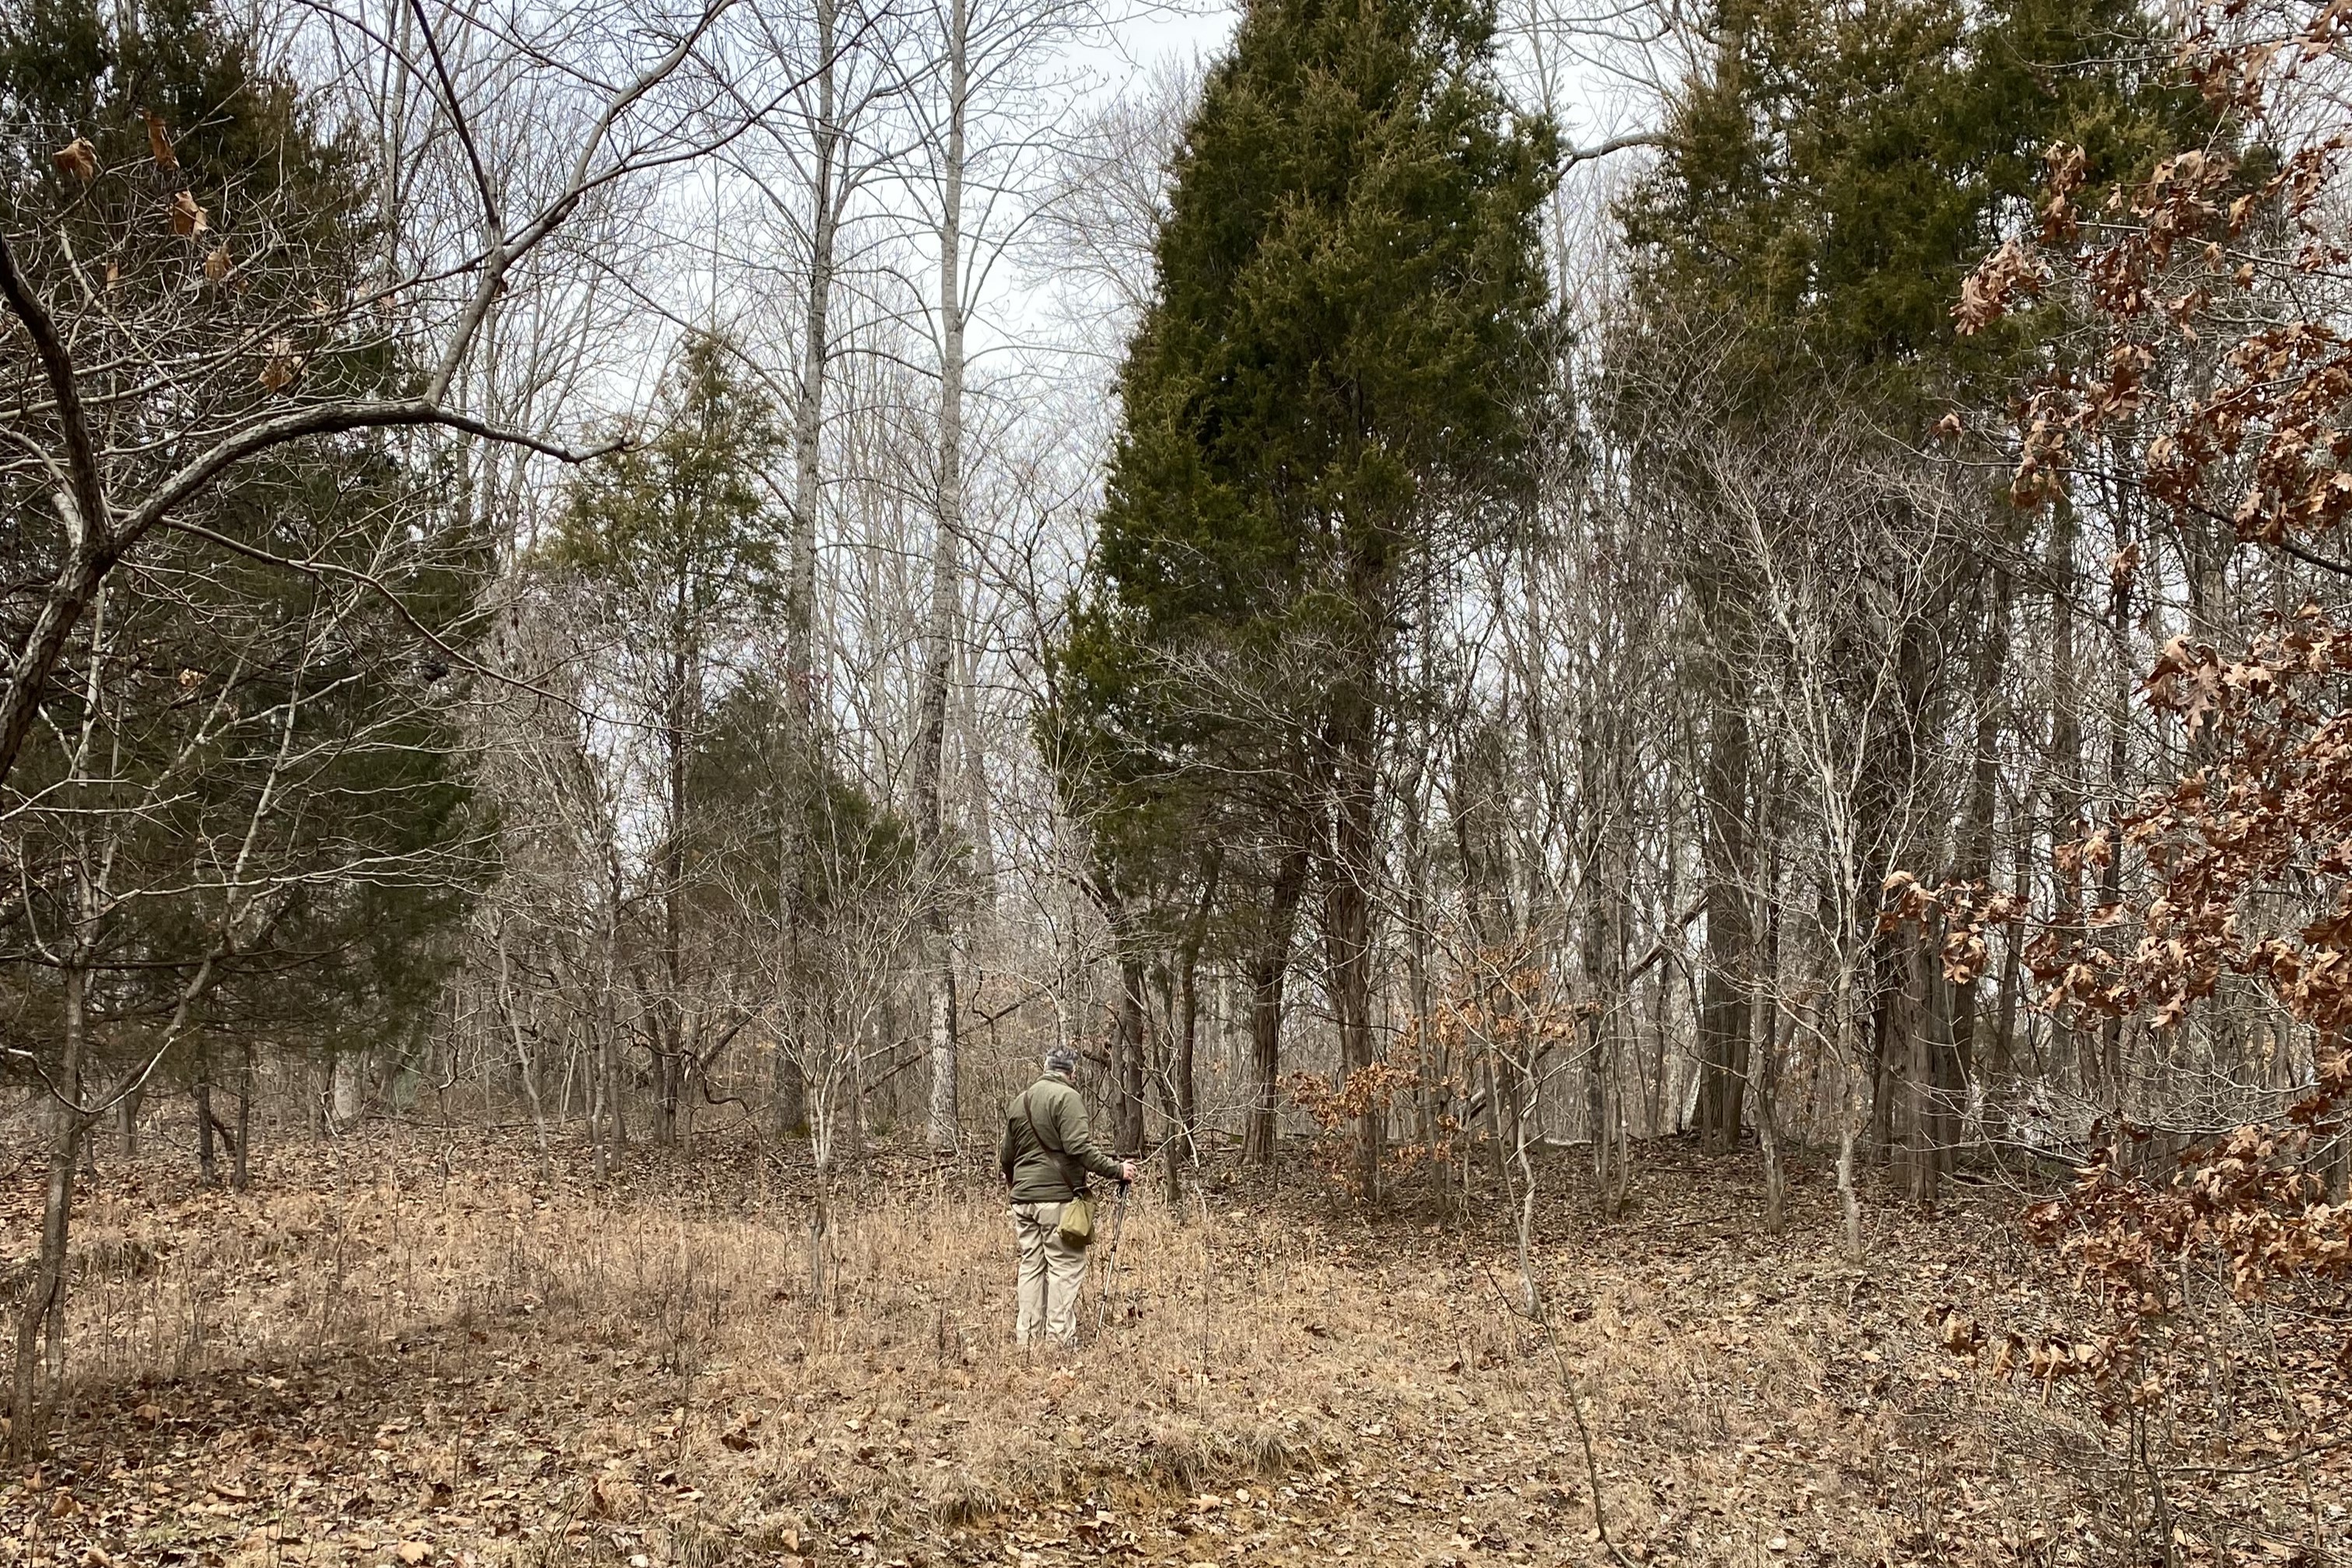 Chapman walks in the sandstone barrens in the Lowe tract of the Hoosier National Forest.